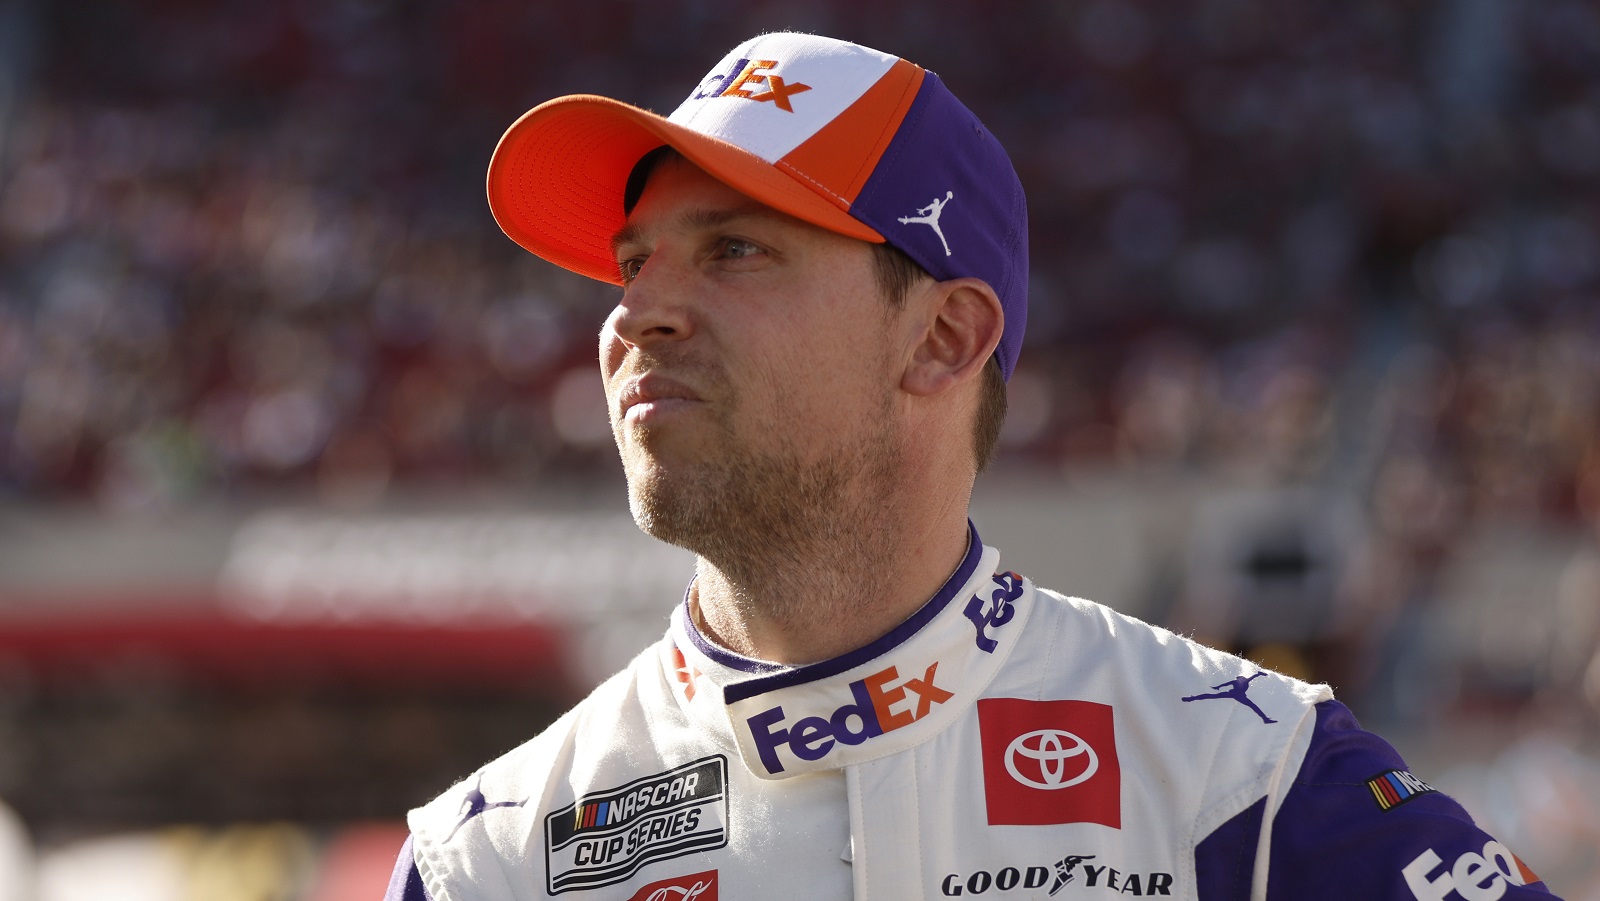 Denny Hamlin is seen on the grid prior to the NASCAR Cup Series Busch Light Clash at the Los Angeles Memorial Coliseum on Feb. 6, 2022. | Chris Graythen/Getty Images